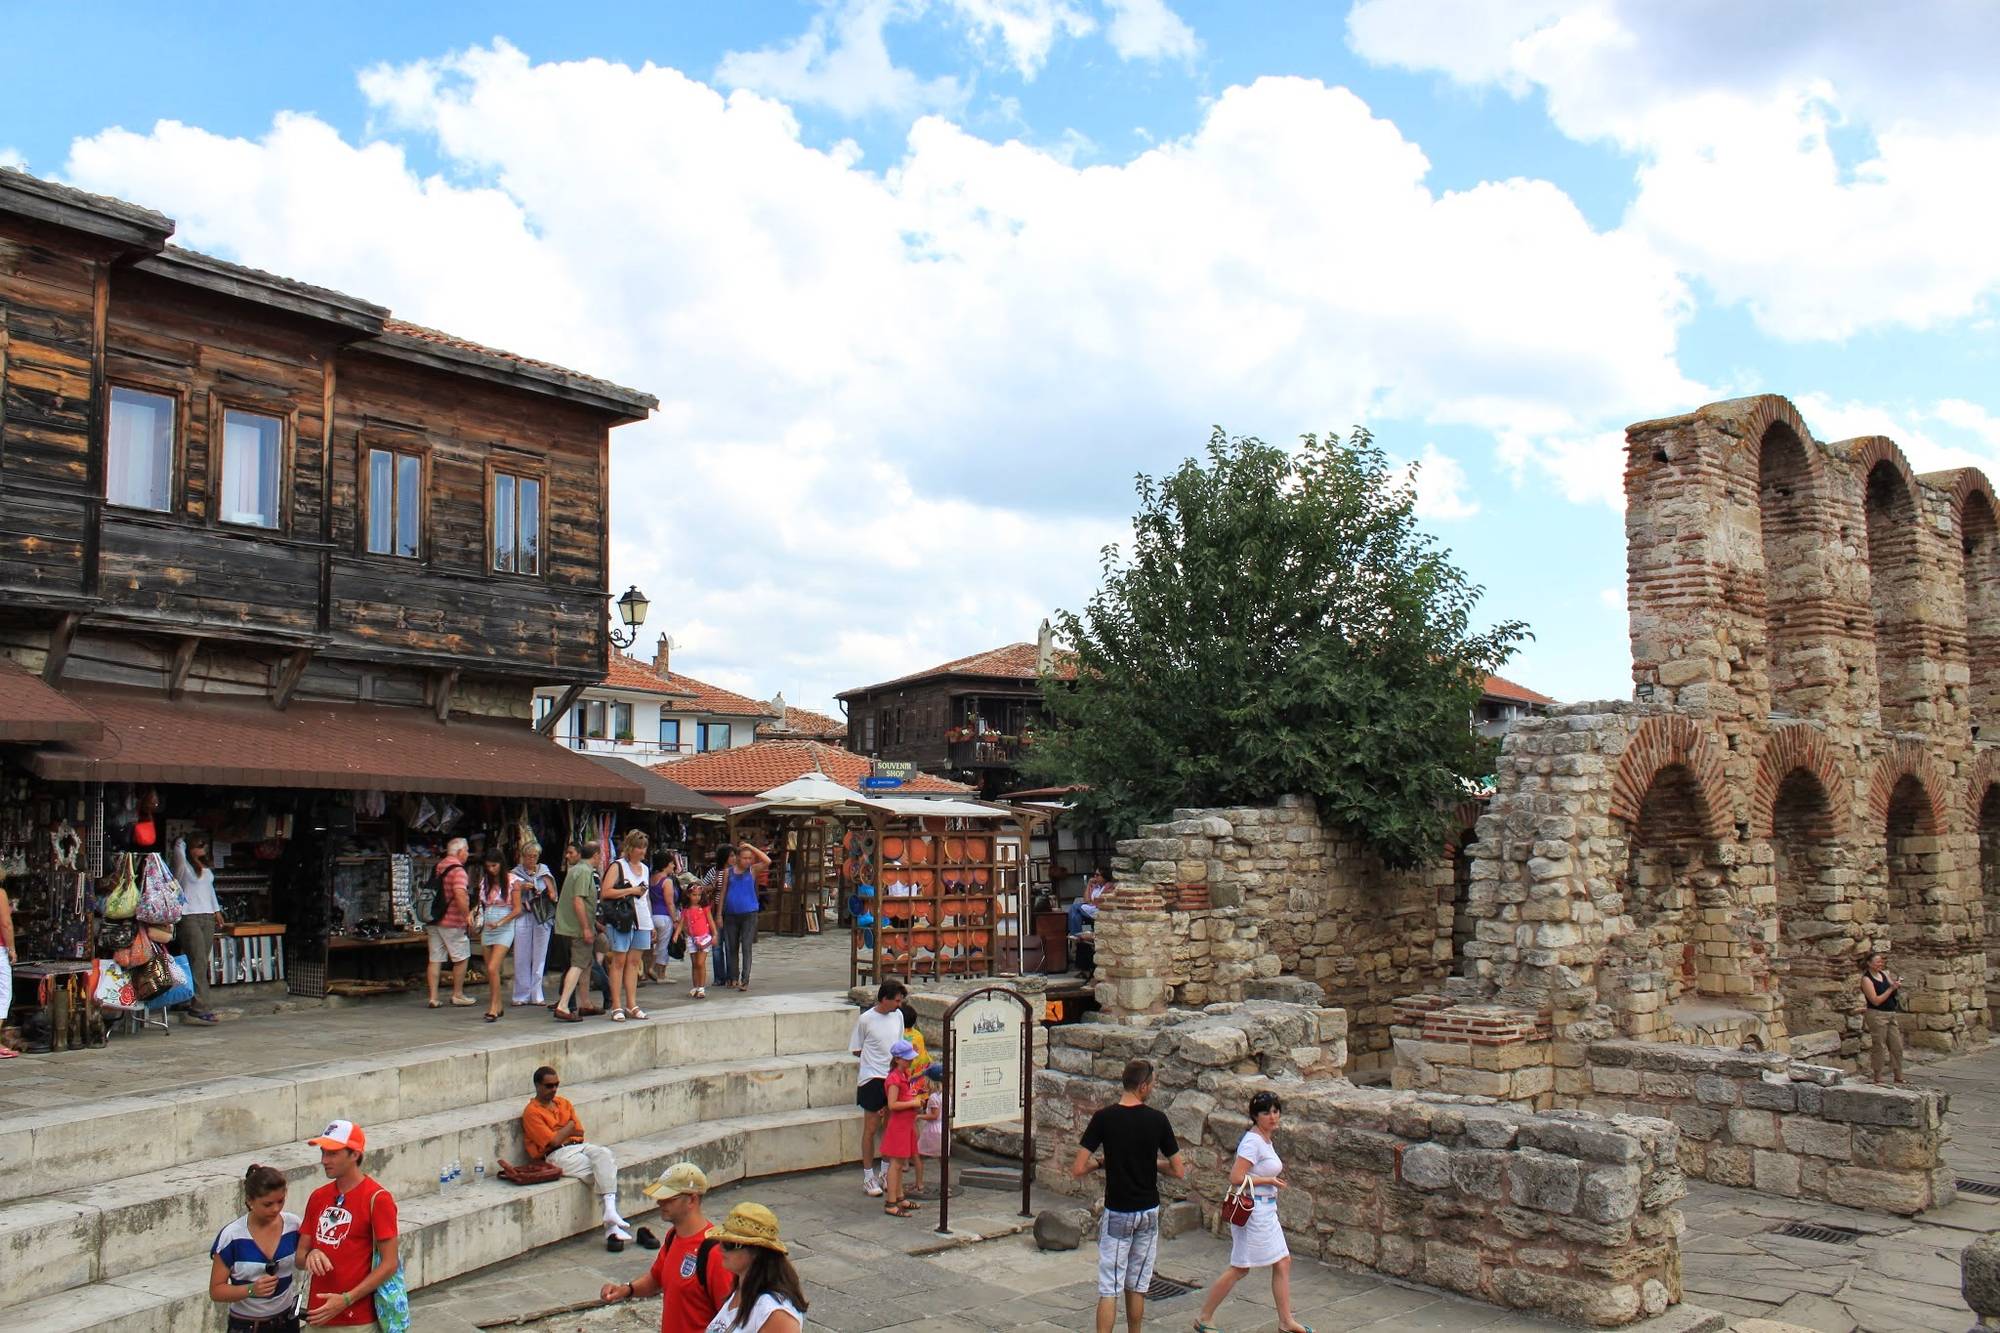 There are many visitors near St. Sophia's Ruins in Nessebar